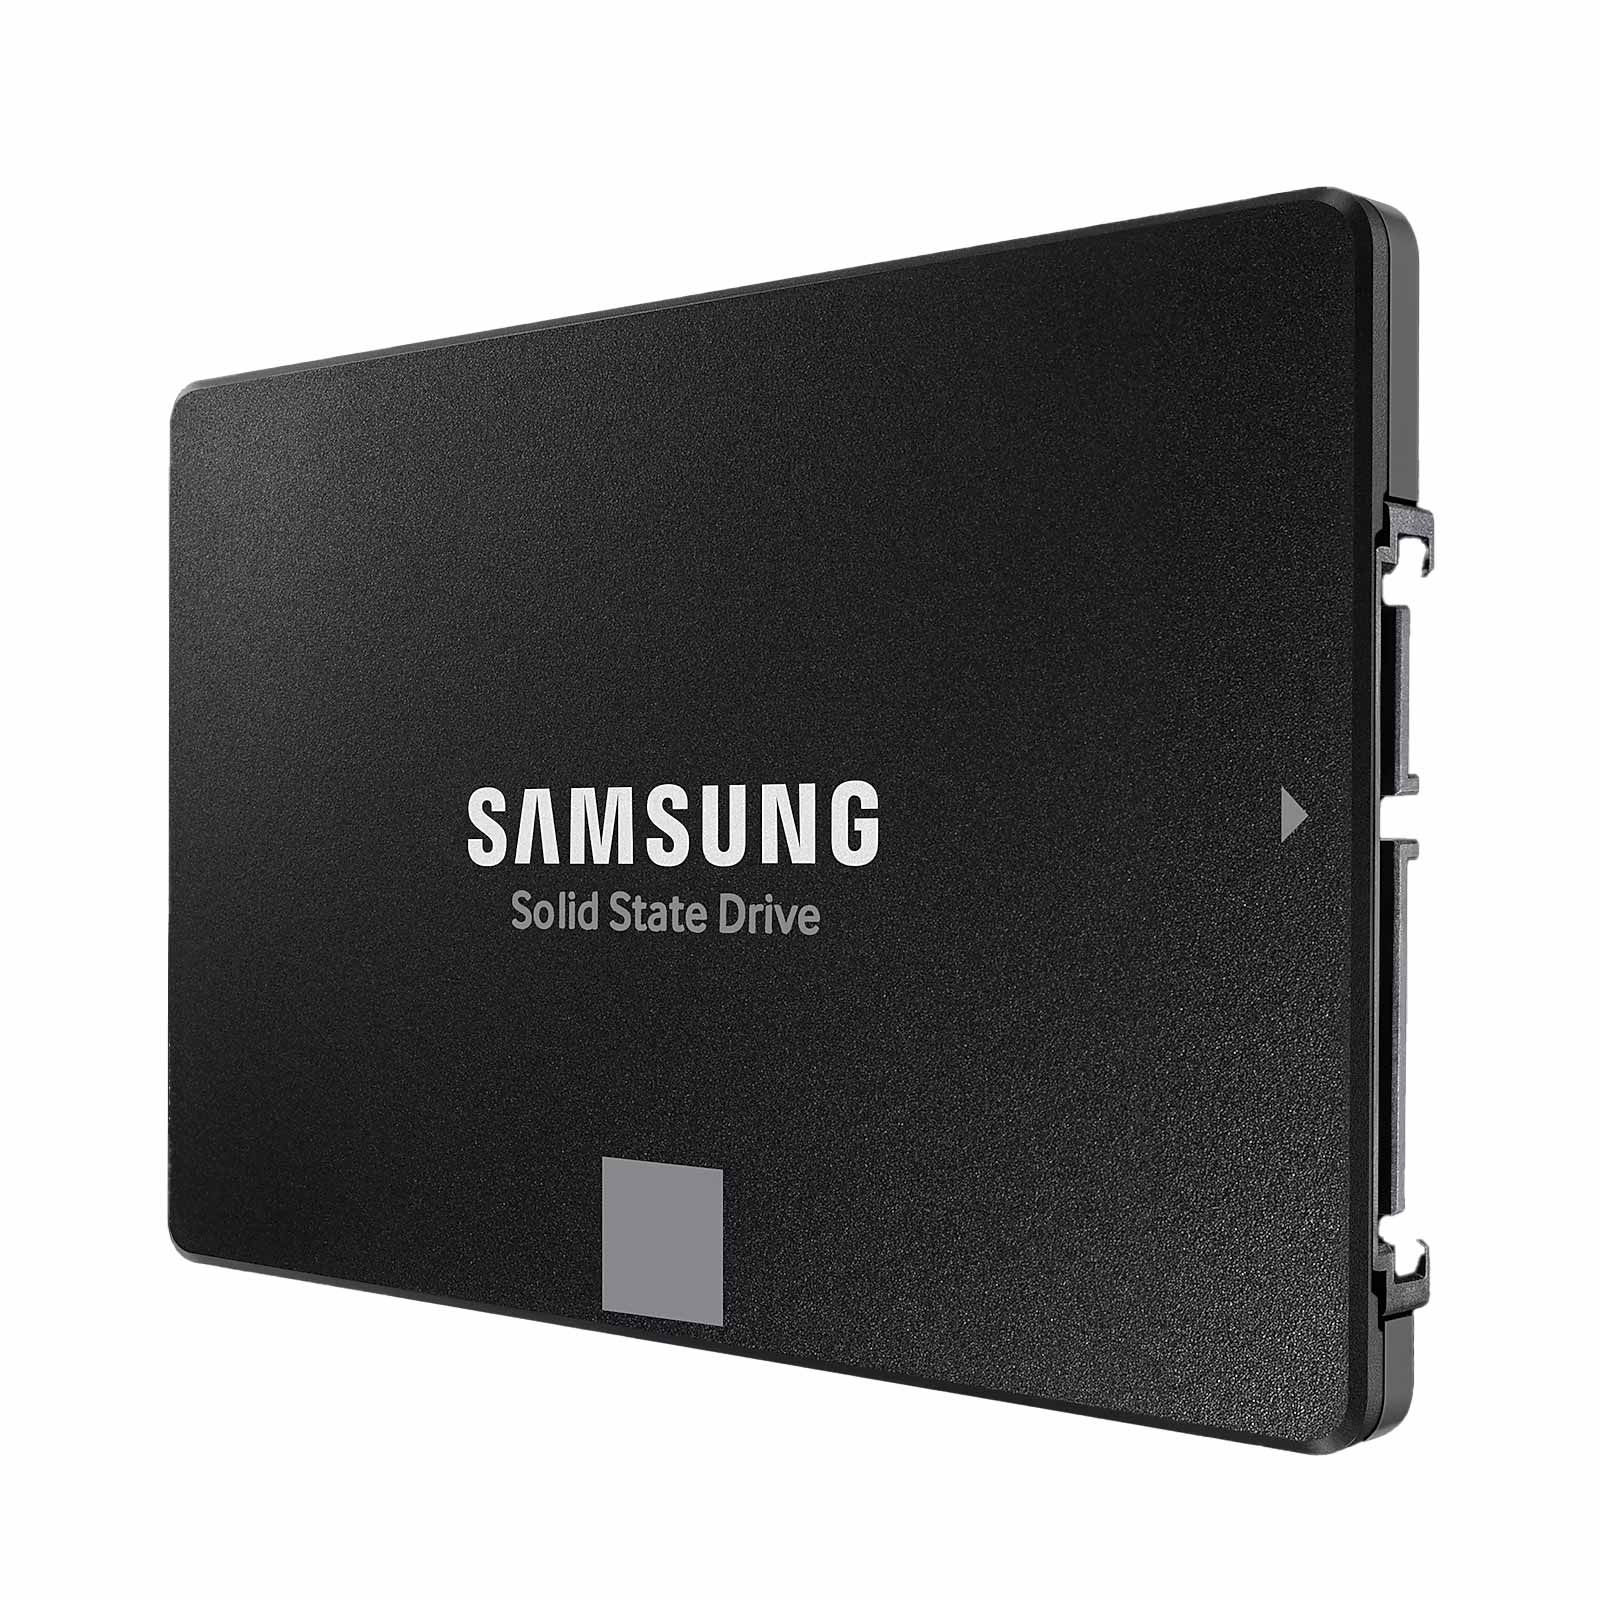 2TB SSD with Full Brands Software for VXDIAG MULTI TOOL